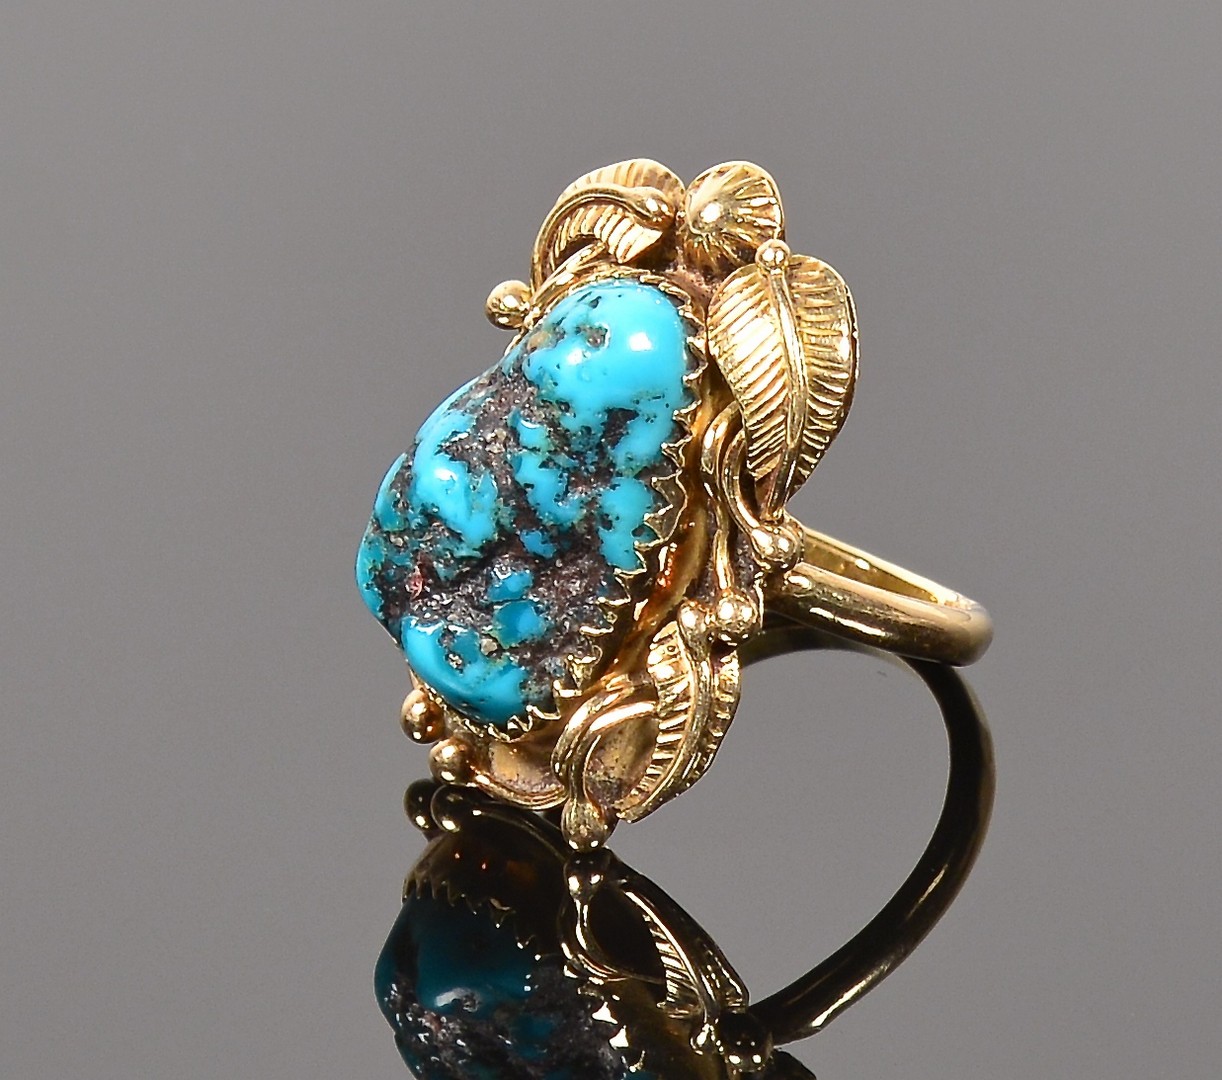 Lot 635: Kirk 18KT Turquoise Ring, circa 1950's